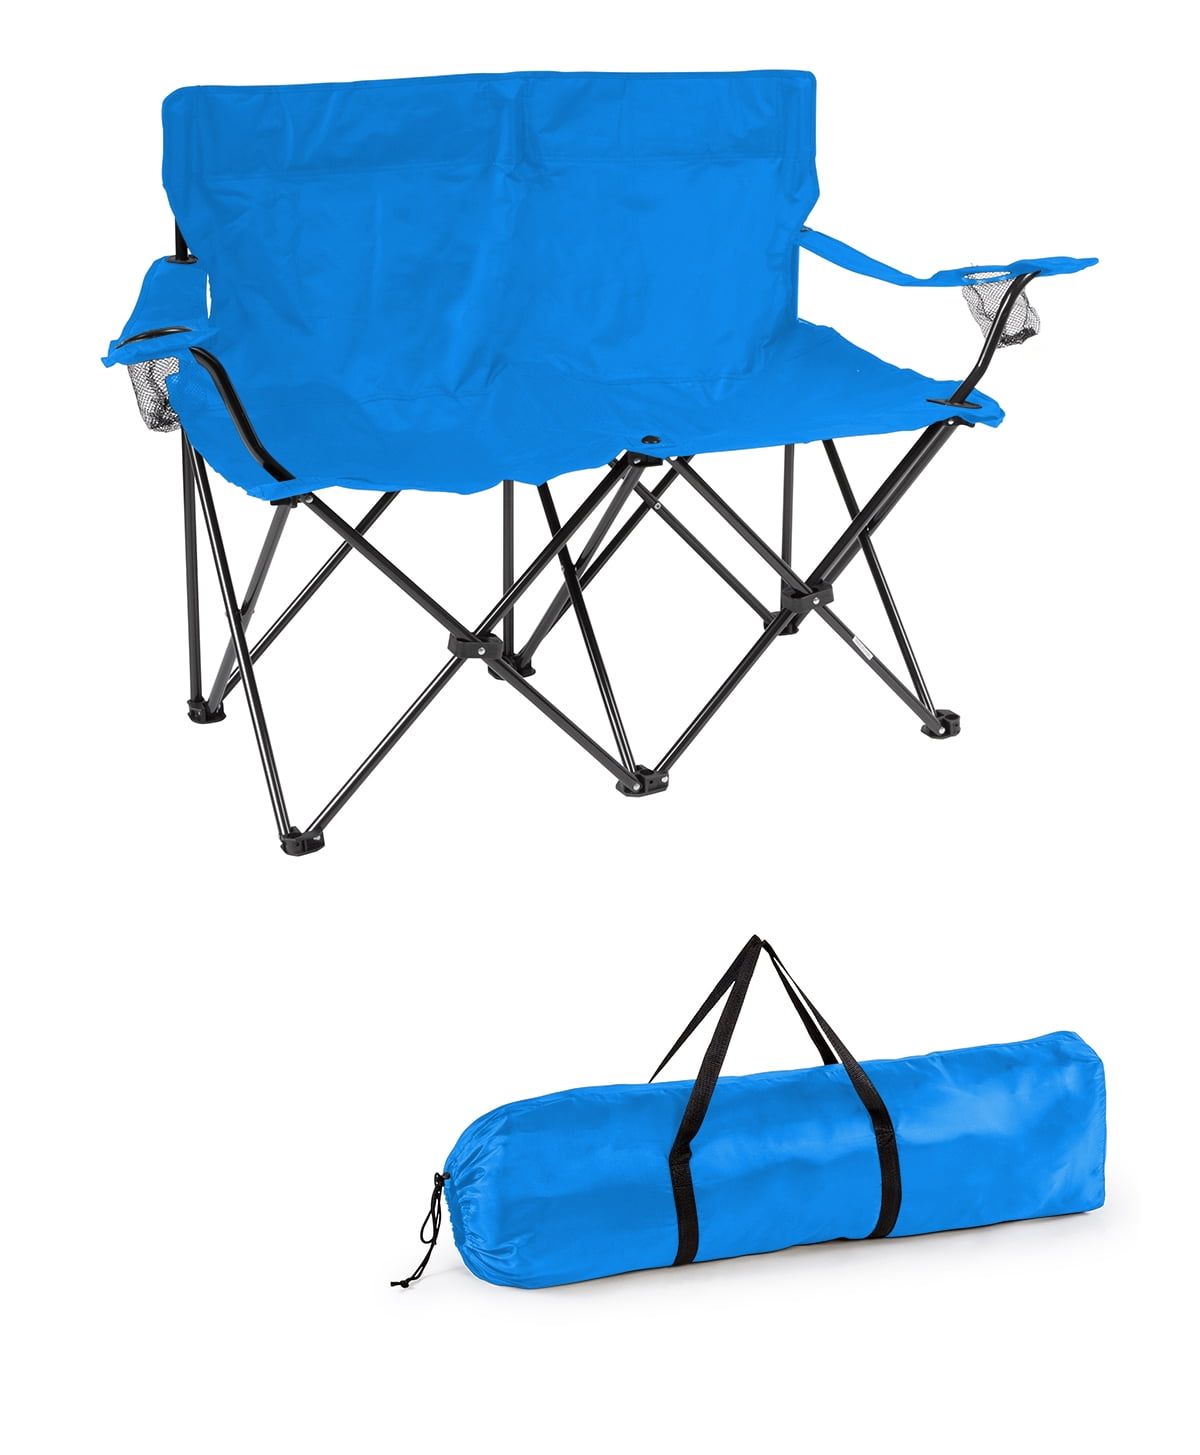 Conversation Camping Steel Quad Chair 2 Seaters Foldable Love Seat Outdoor NEW 